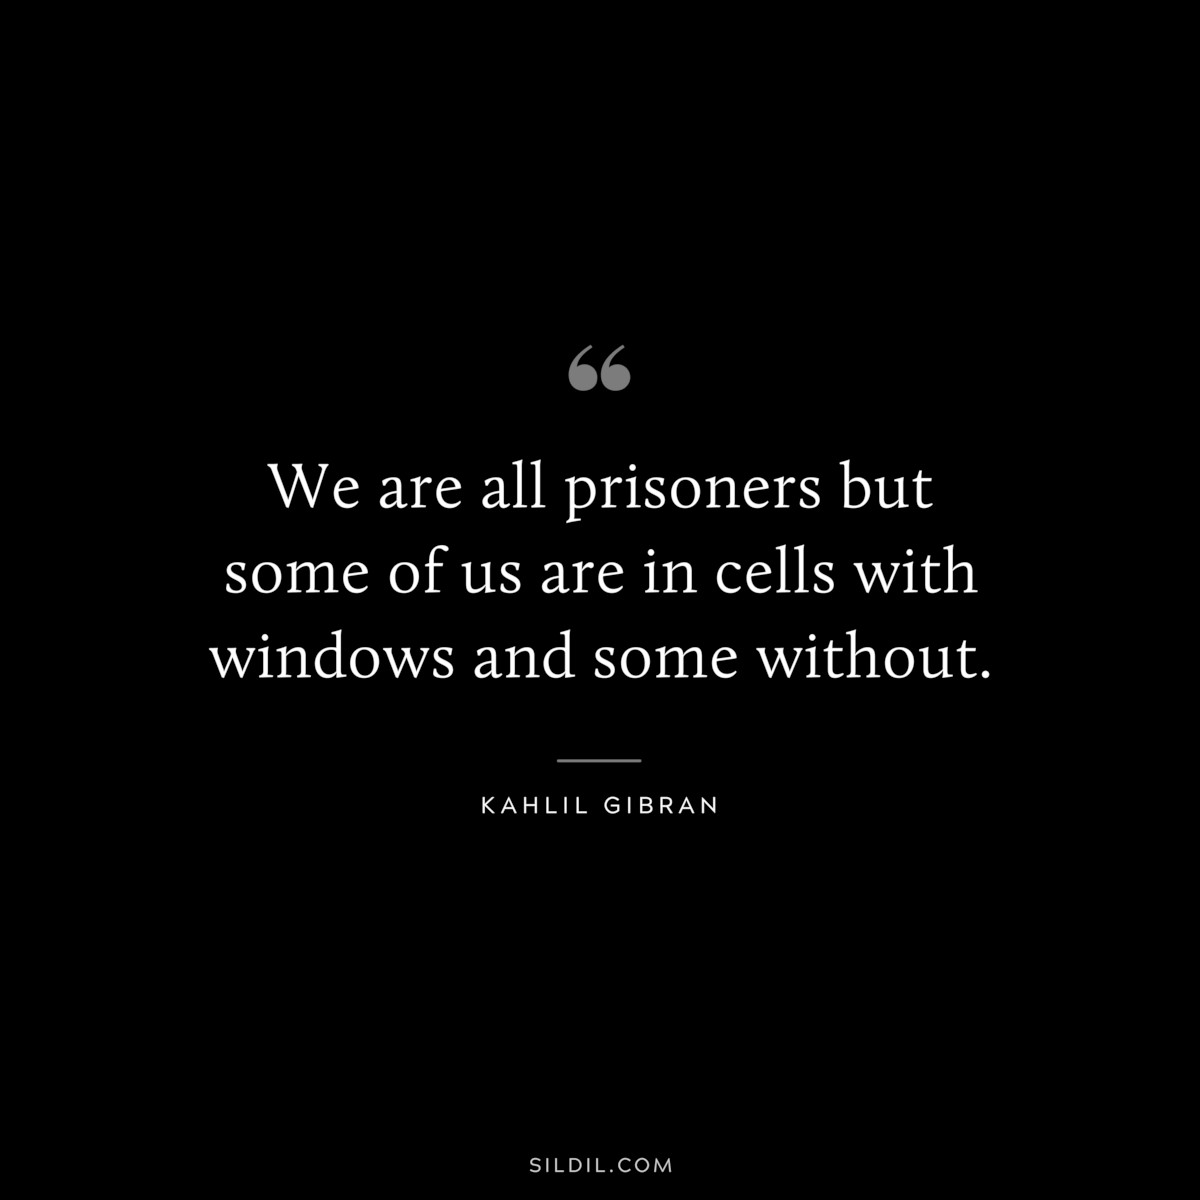 We are all prisoners but some of us are in cells with windows and some without. ― Kahlil Gibran